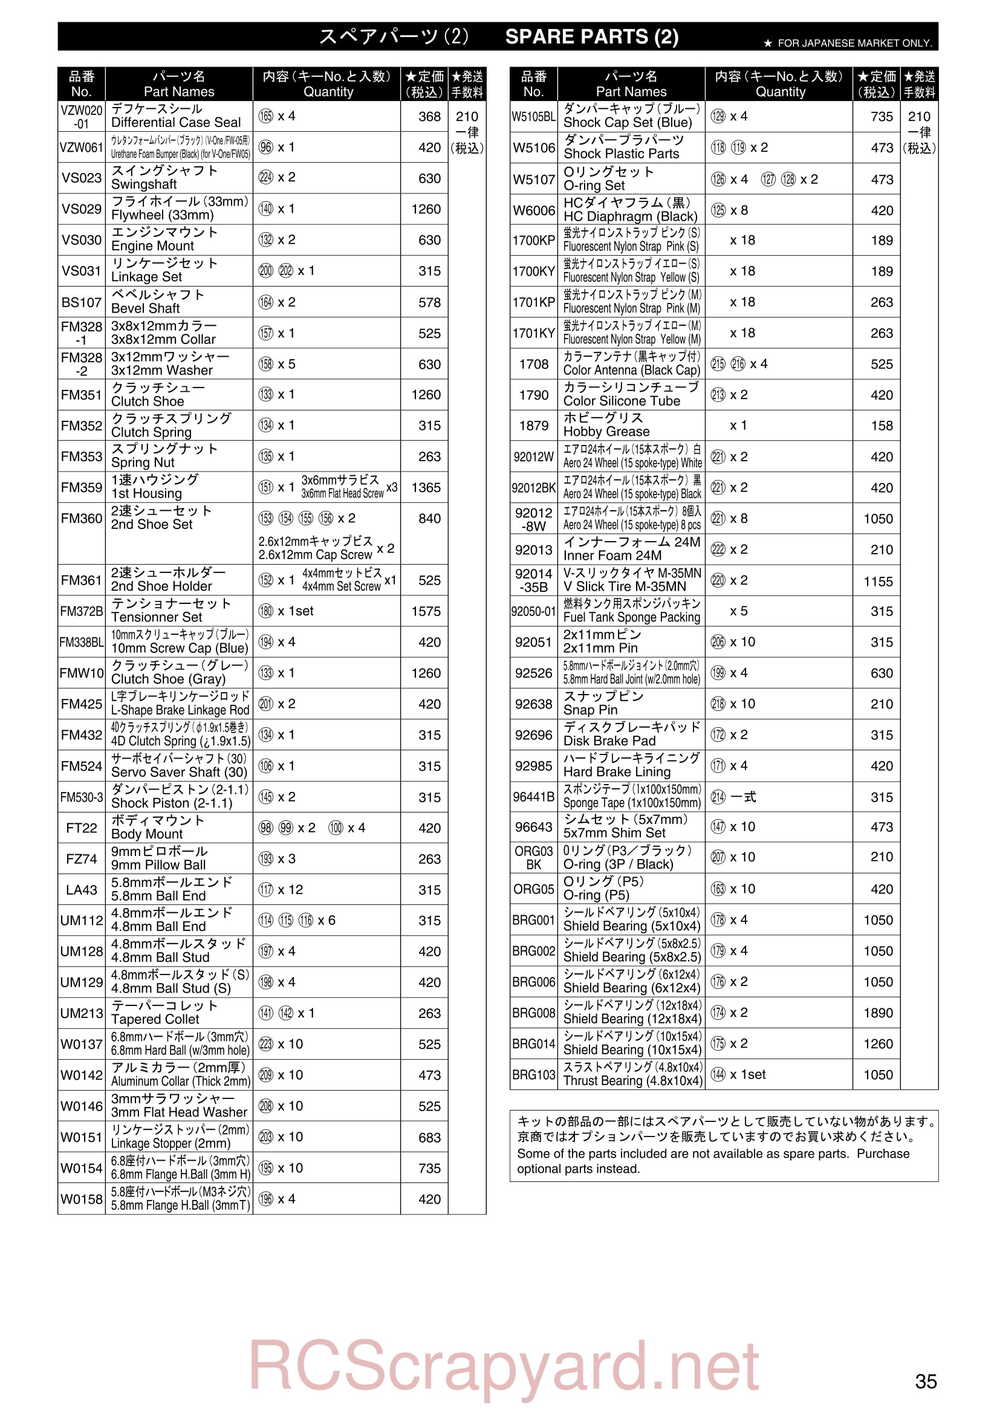 Kyosho - 31257 - V-One RRR Rubber - Manual - Page 34